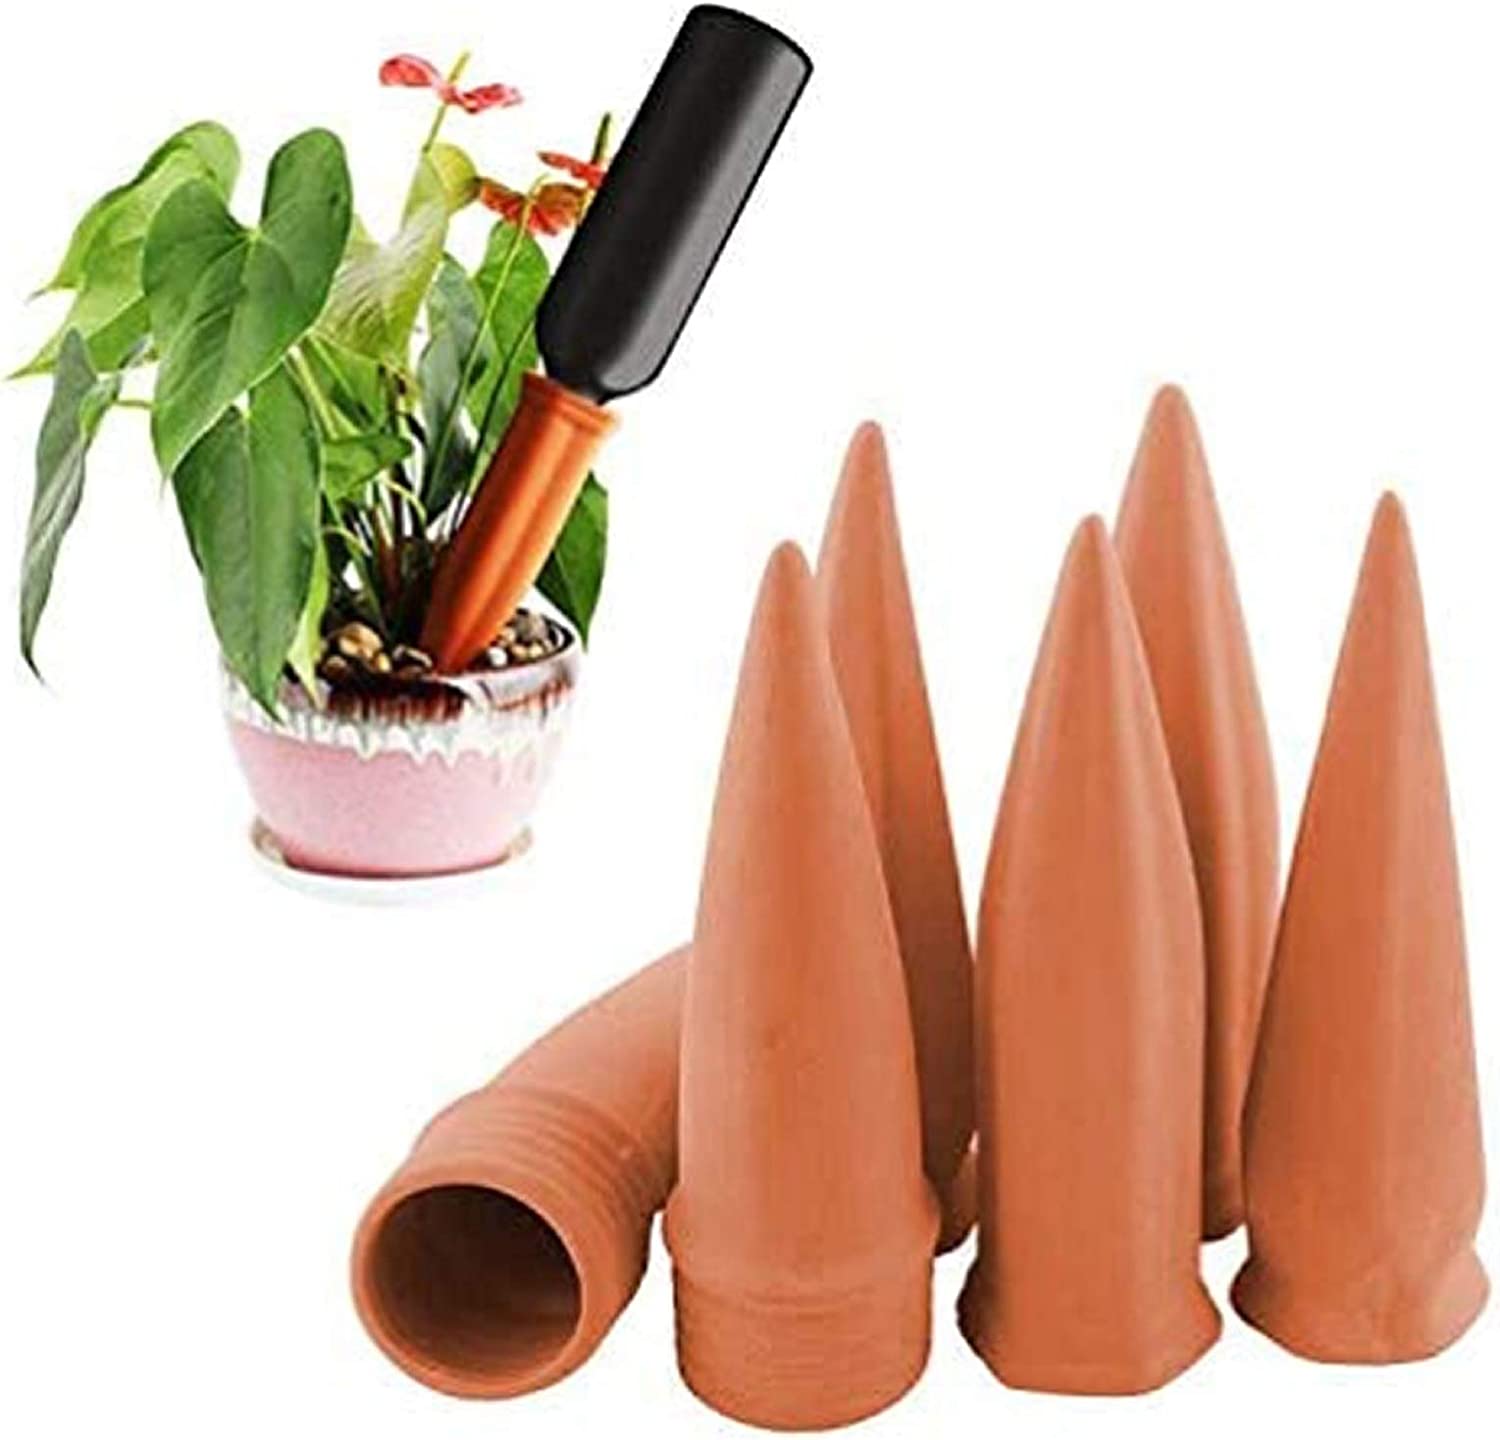 MorTime Plant Watering Devices, Plant Waterer Self Watering Terracotta Spikes Automatically Water Your Indoor and Outdoor Plants While On Vacation (6pc)